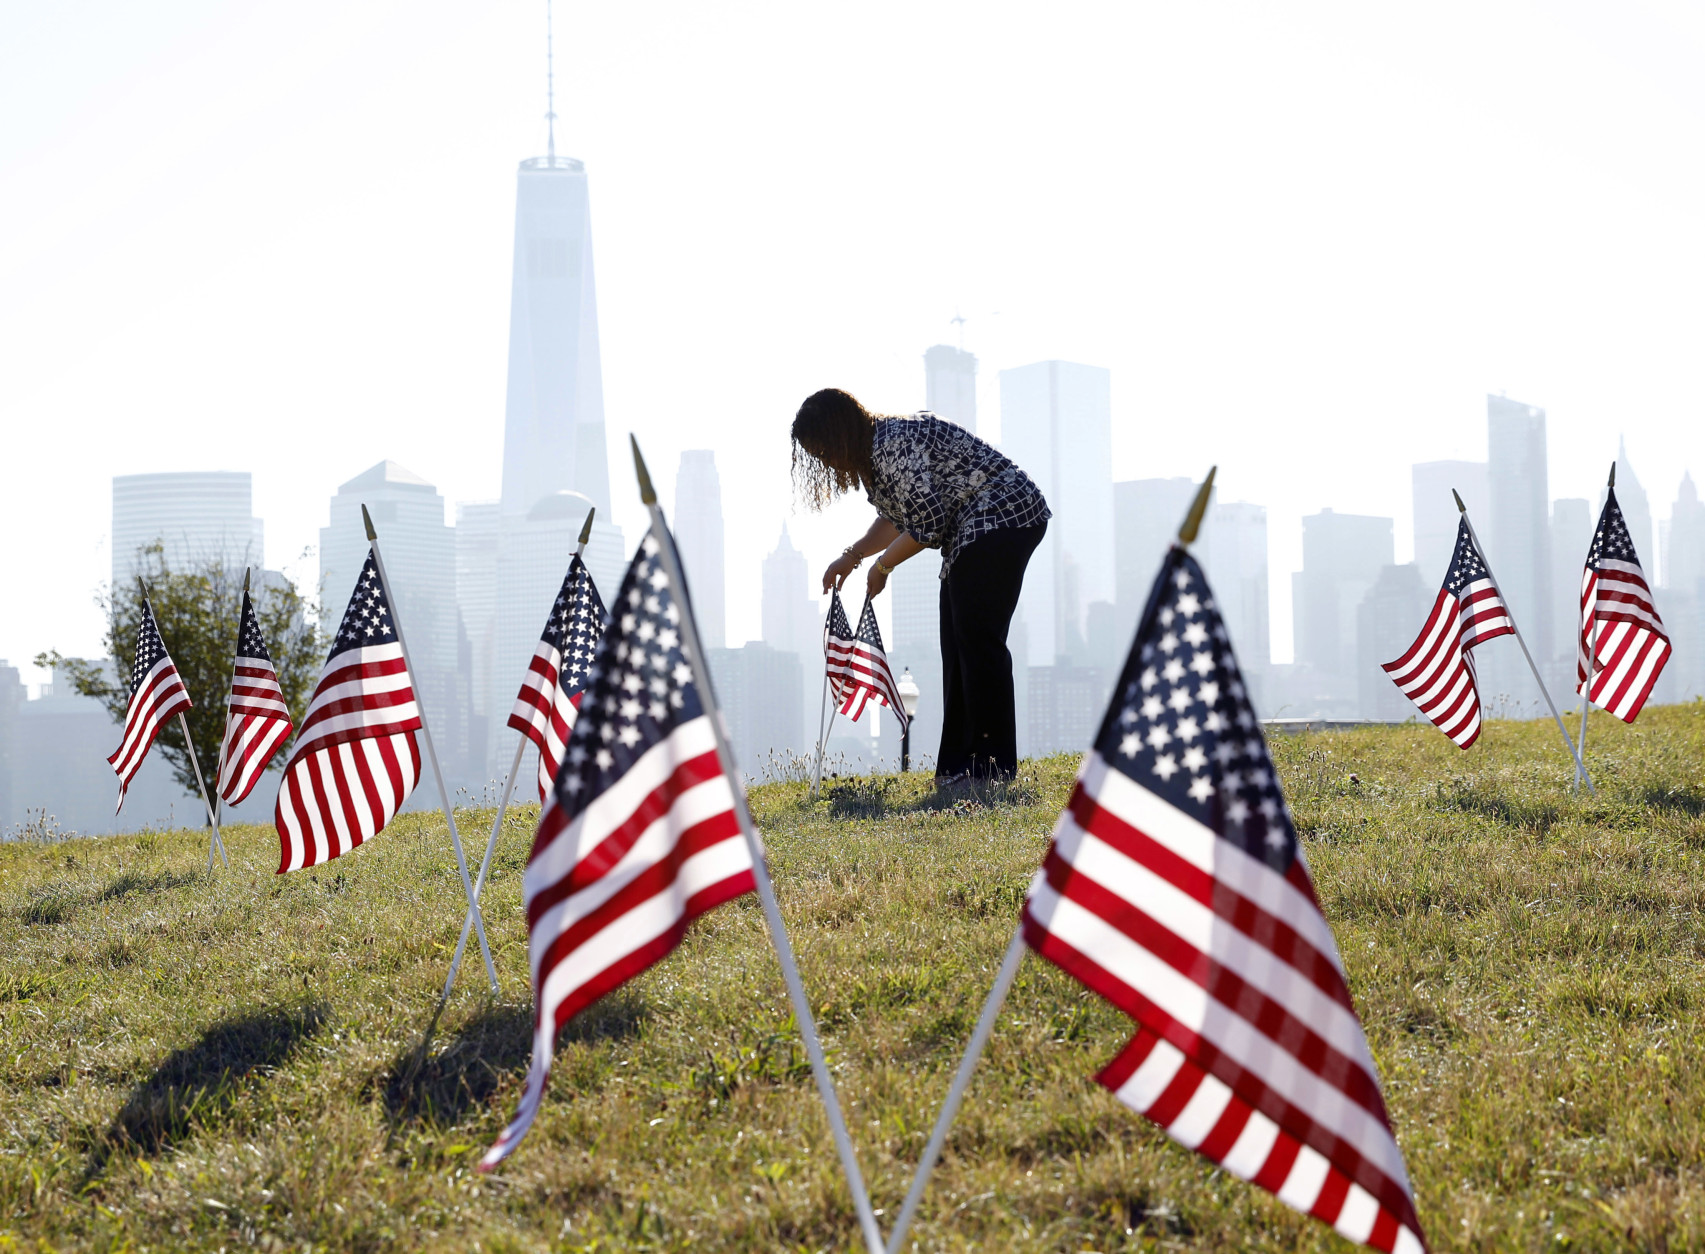 Yalenny Vargas arranges flags for the Fourth Of July celebrations at Liberty State Park on Monday, July 4, 2016, in Jersey City, N.J. (AP Photo/Mel Evans)